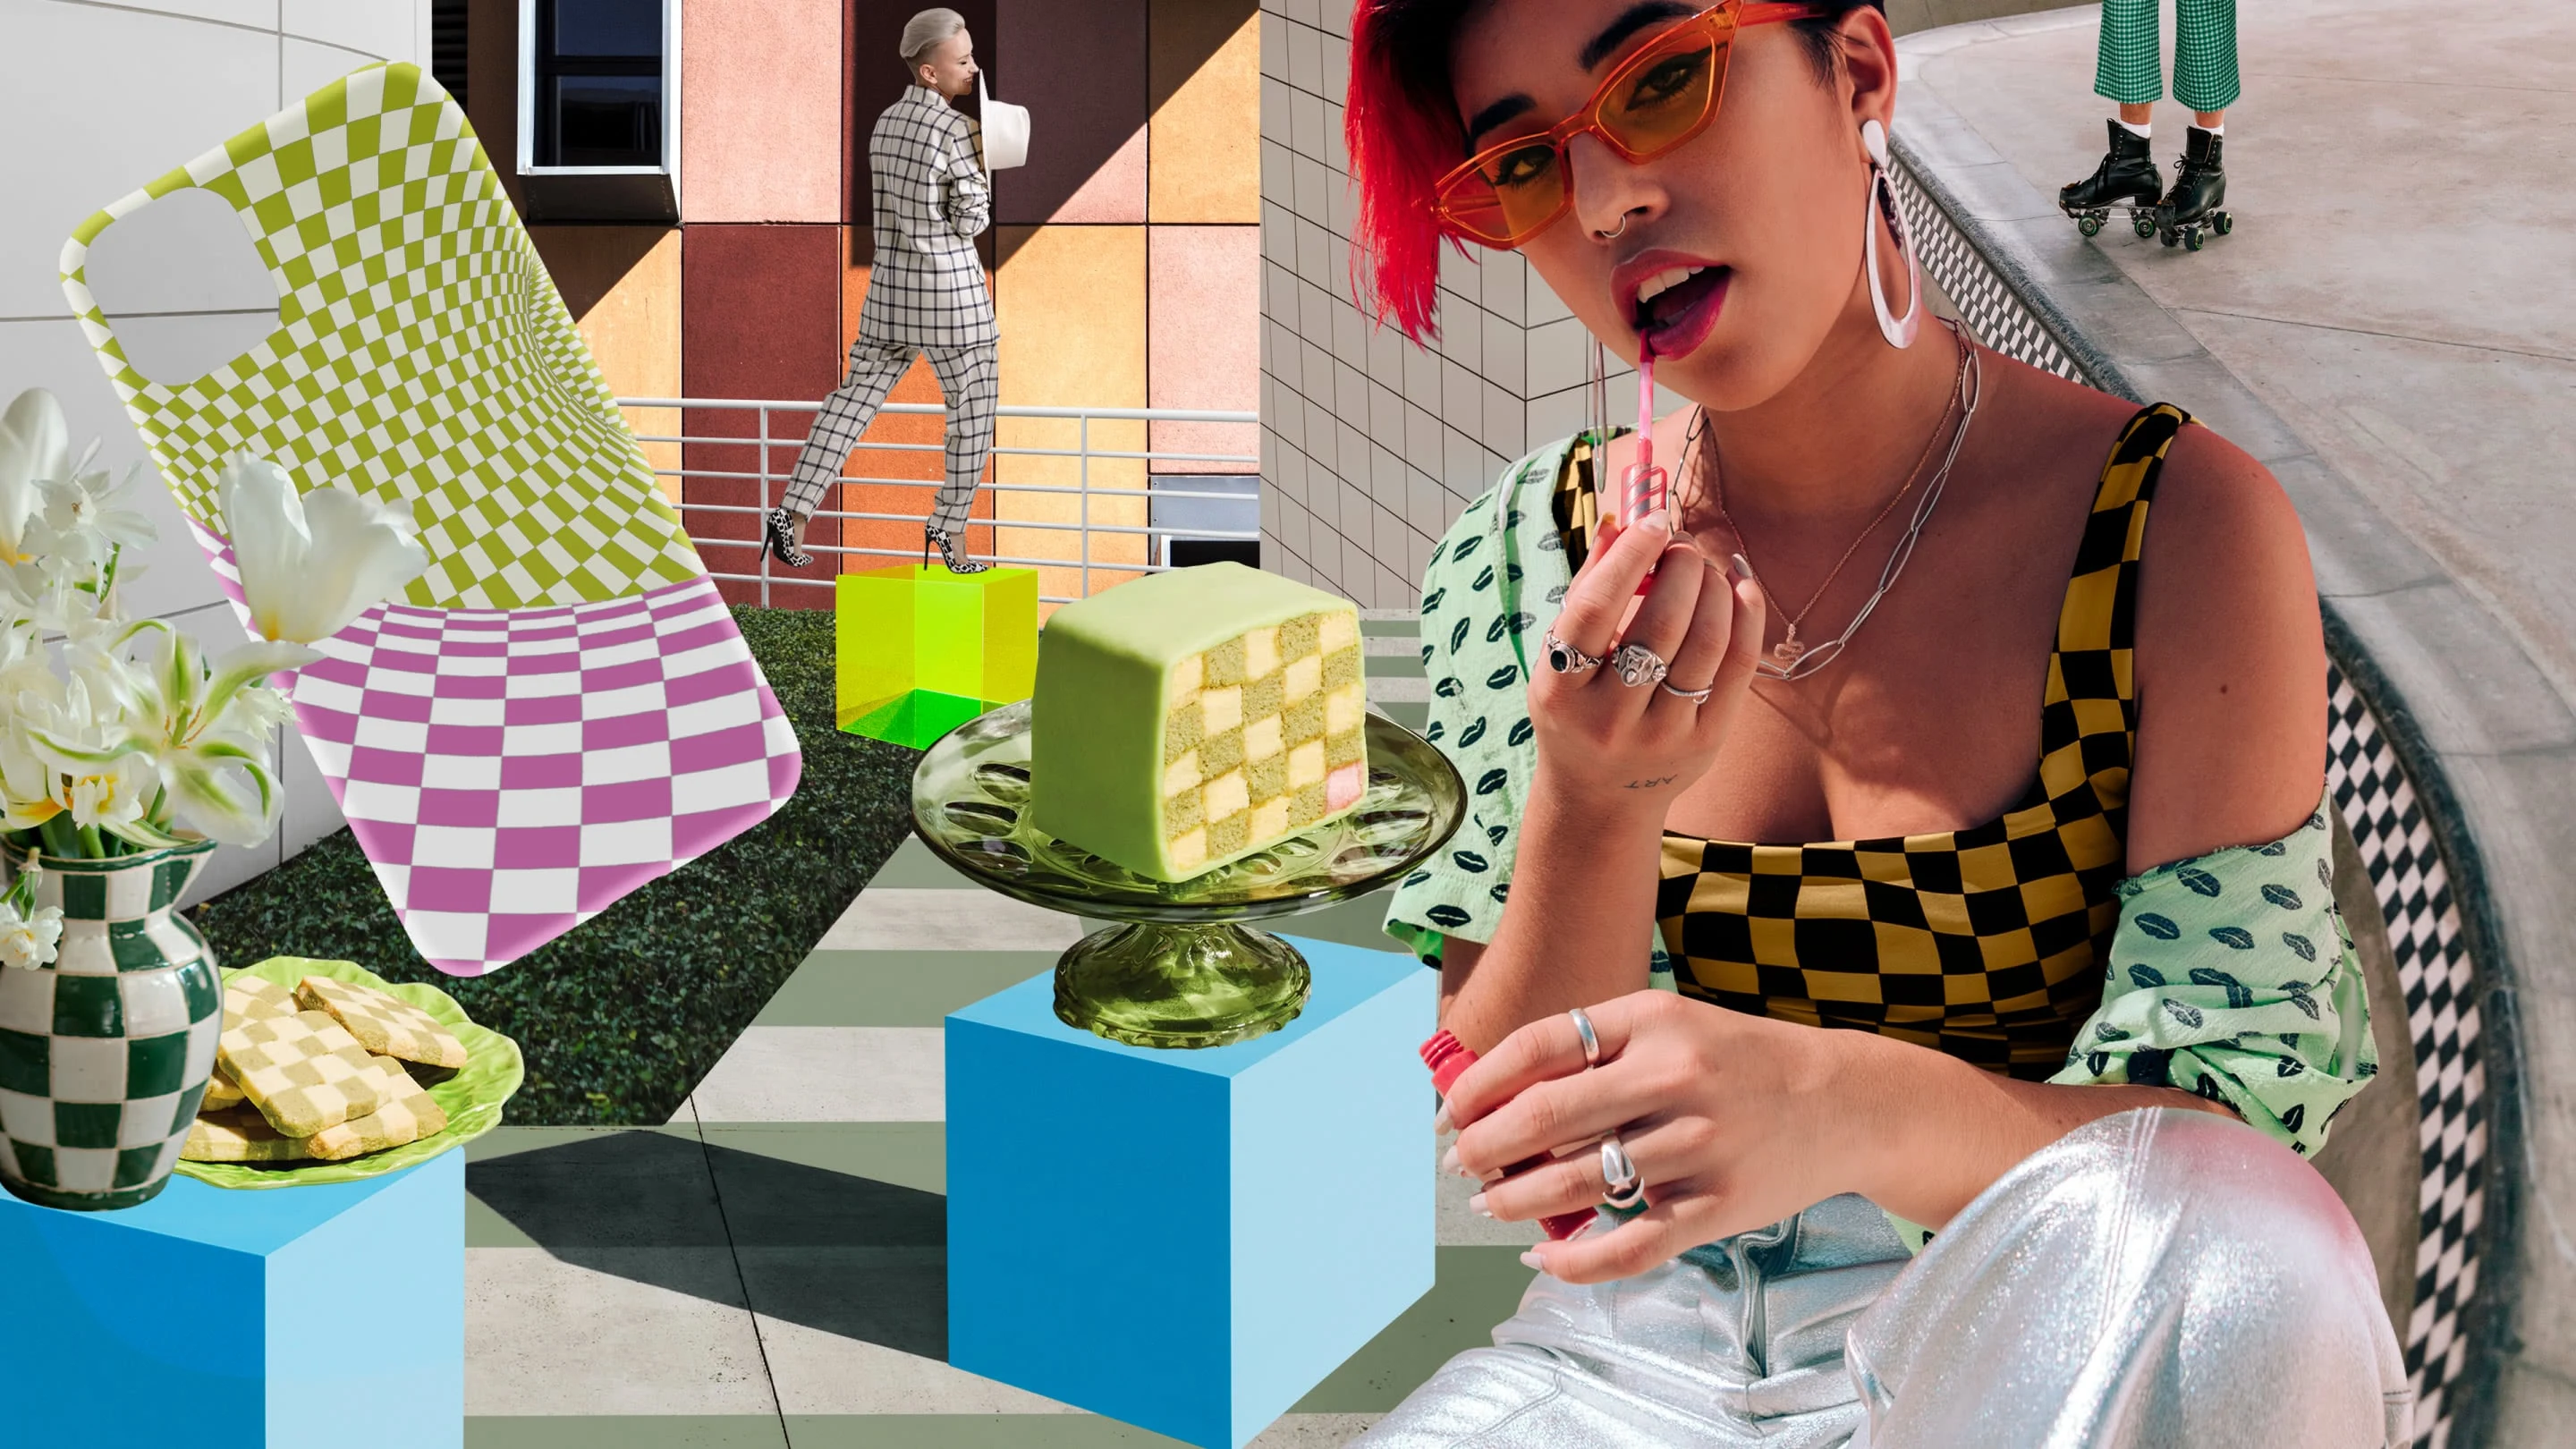 Collage of chequered items. A large mobile phone case, a piece of green and white cake on a platter, a plate of biscuits, a vase and walls. An East Asian woman, with short red hair, wearing a chequered tank top, applies red lip liner.